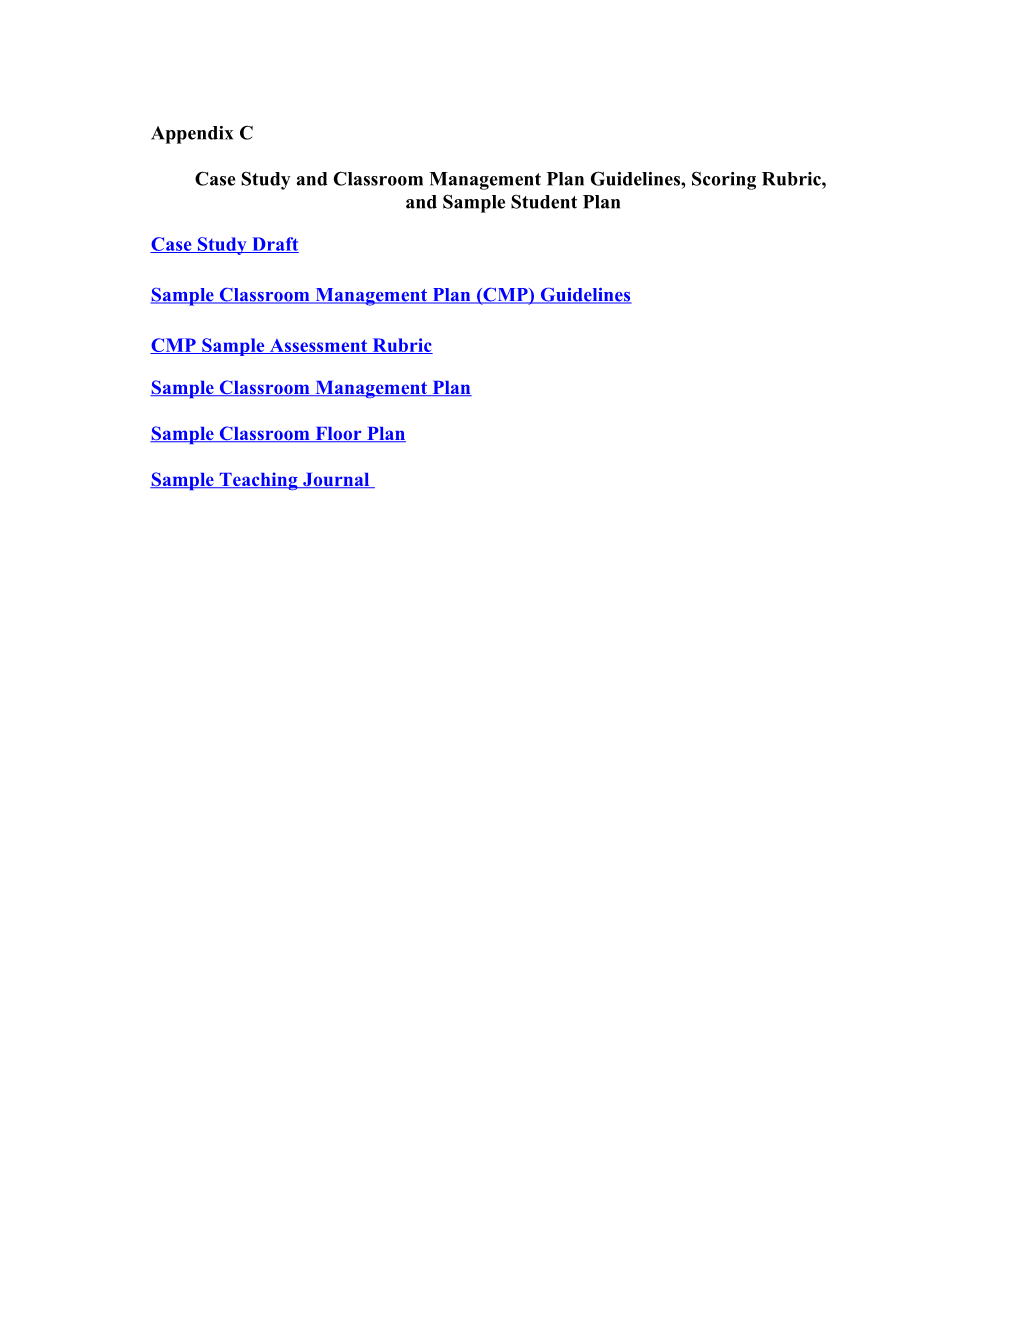 Case Study and Classroom Management Plan Guidelines, Scoring Rubric